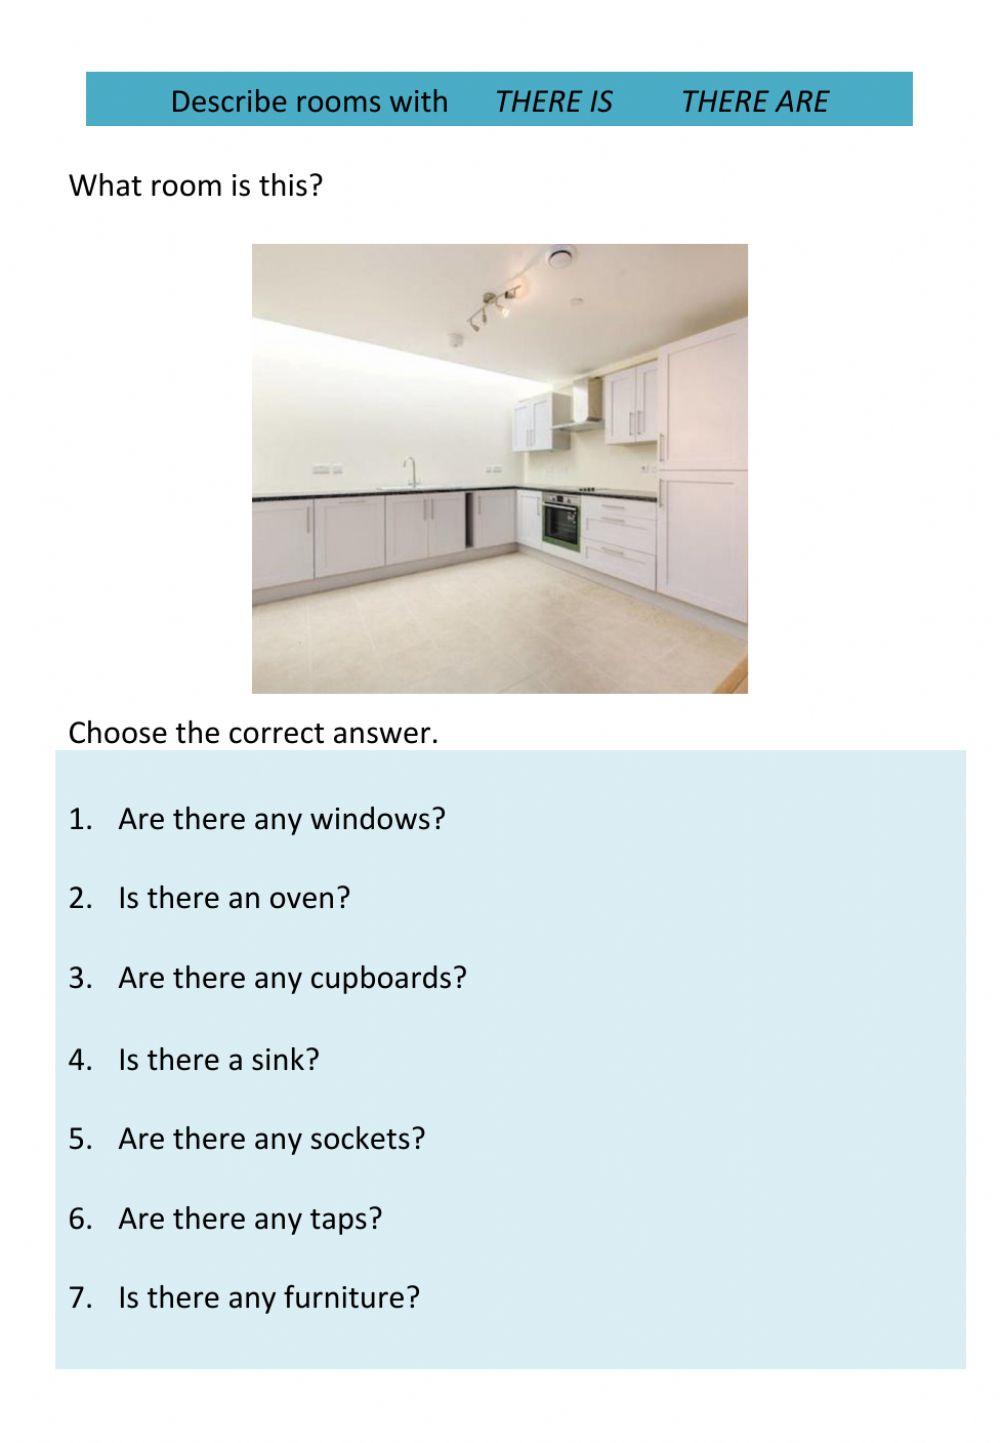 Ask questions about rooms in a flat